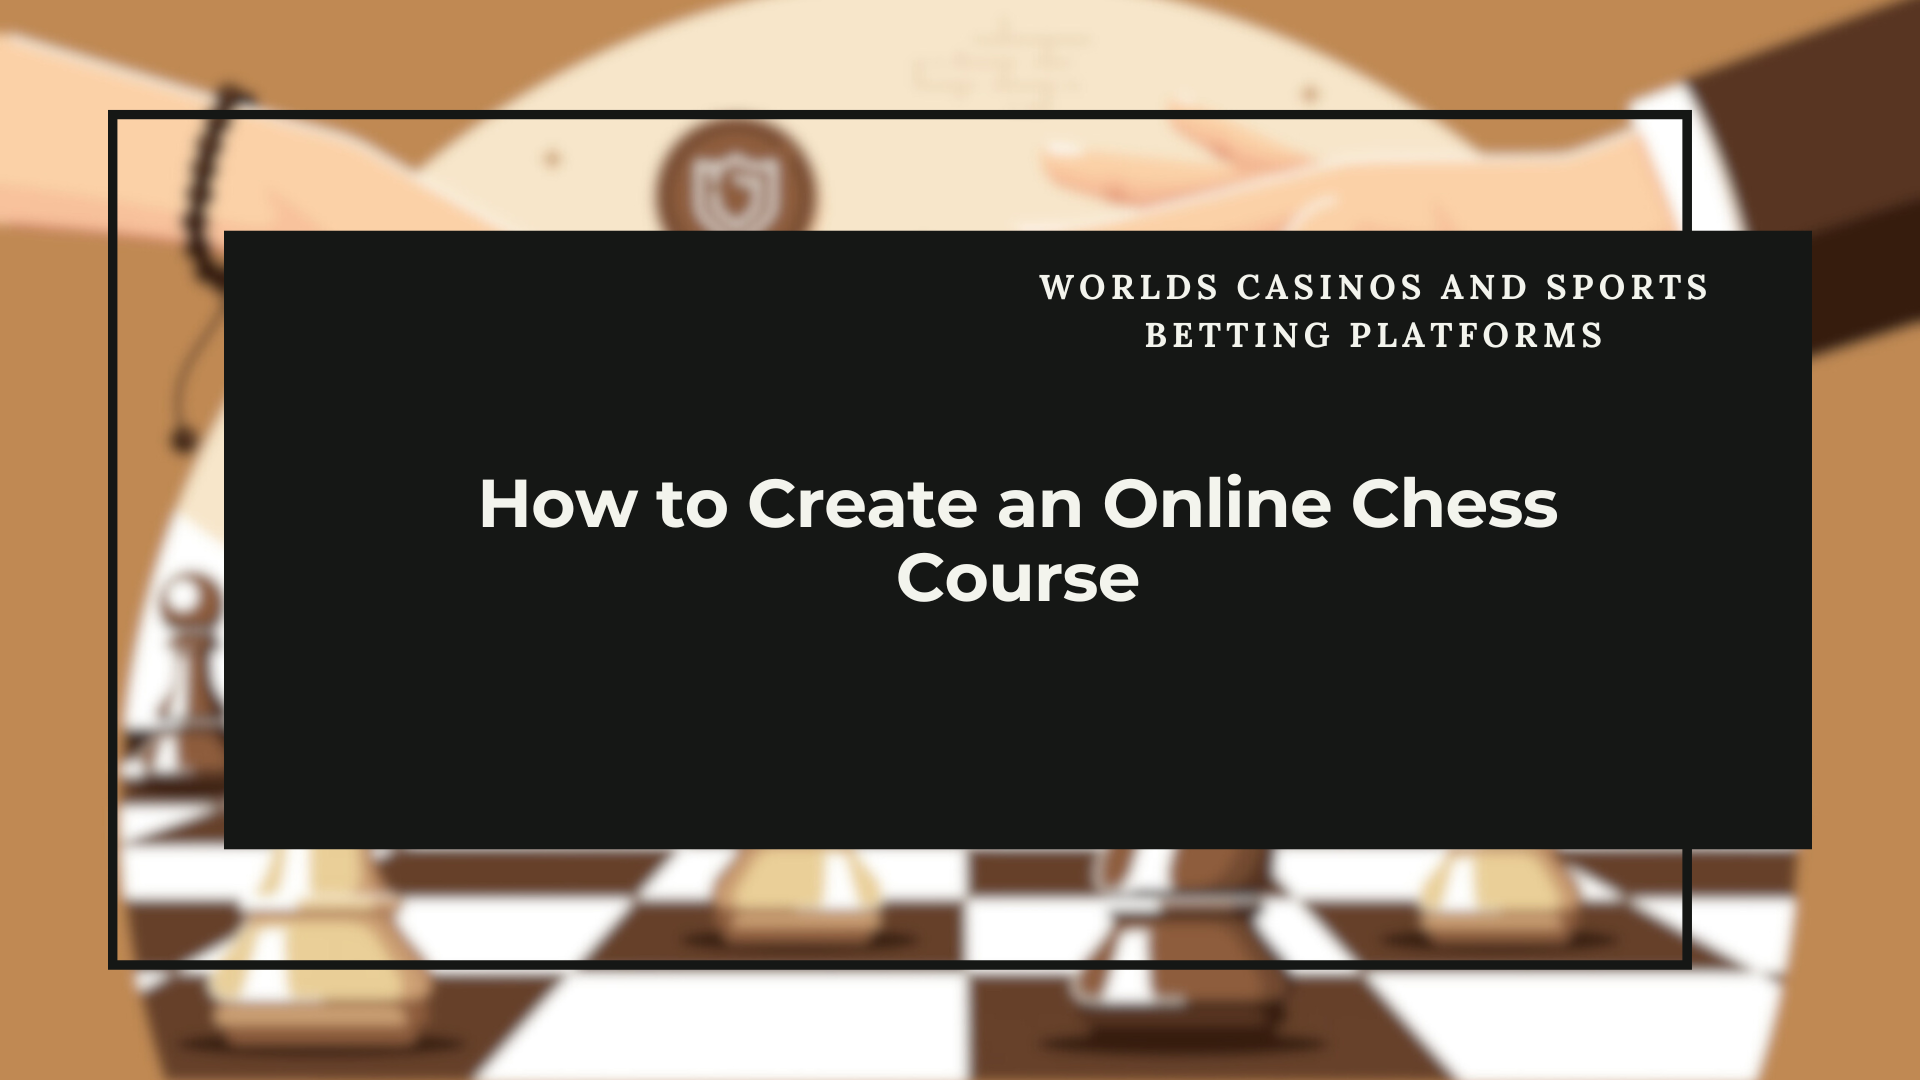 How to Create an Online Chess Course